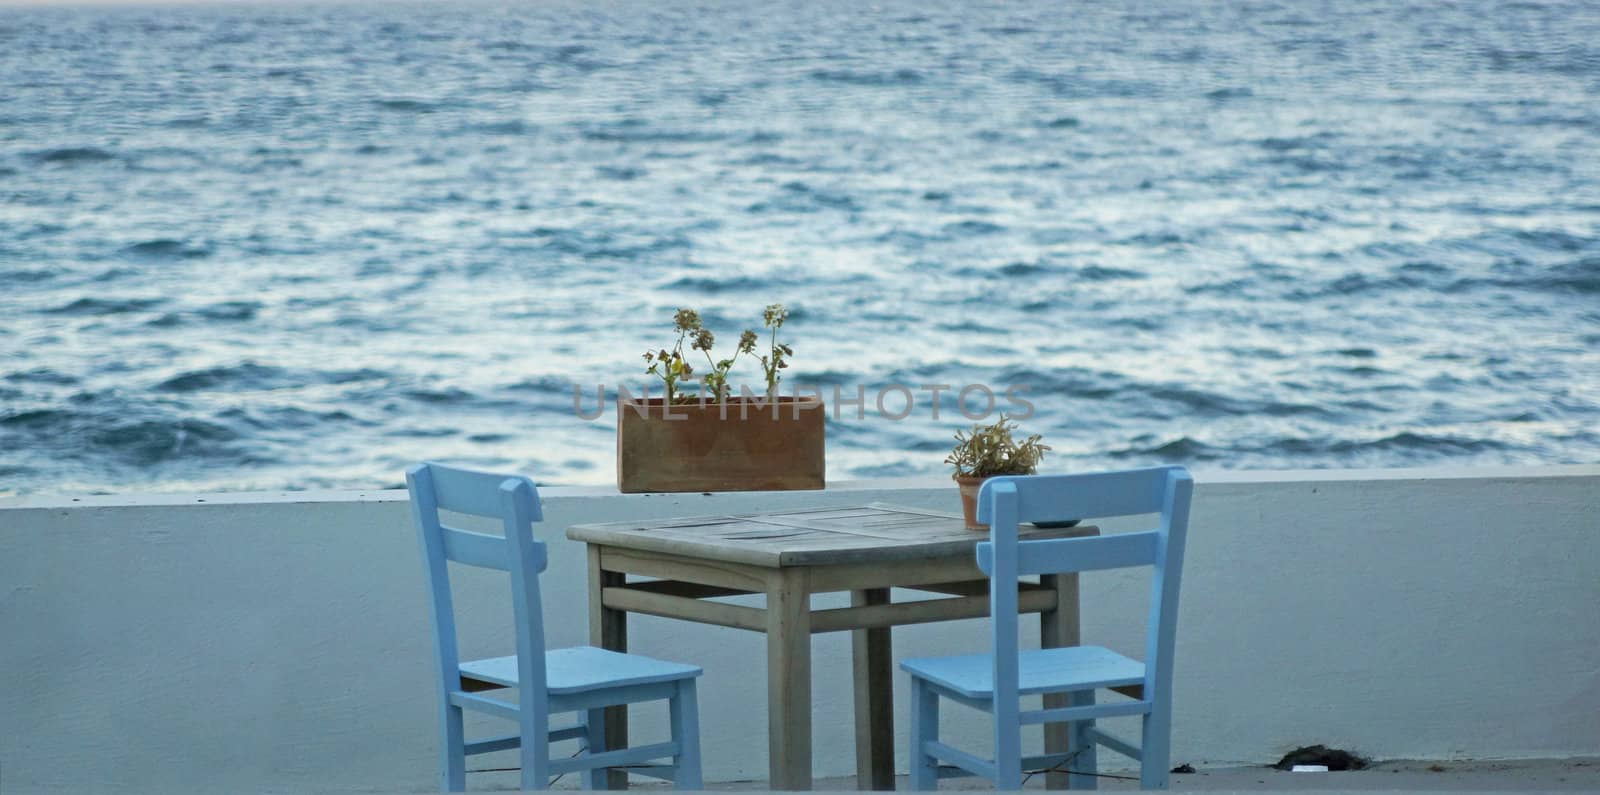 Wooden chair and table by the sea  by necatiturker